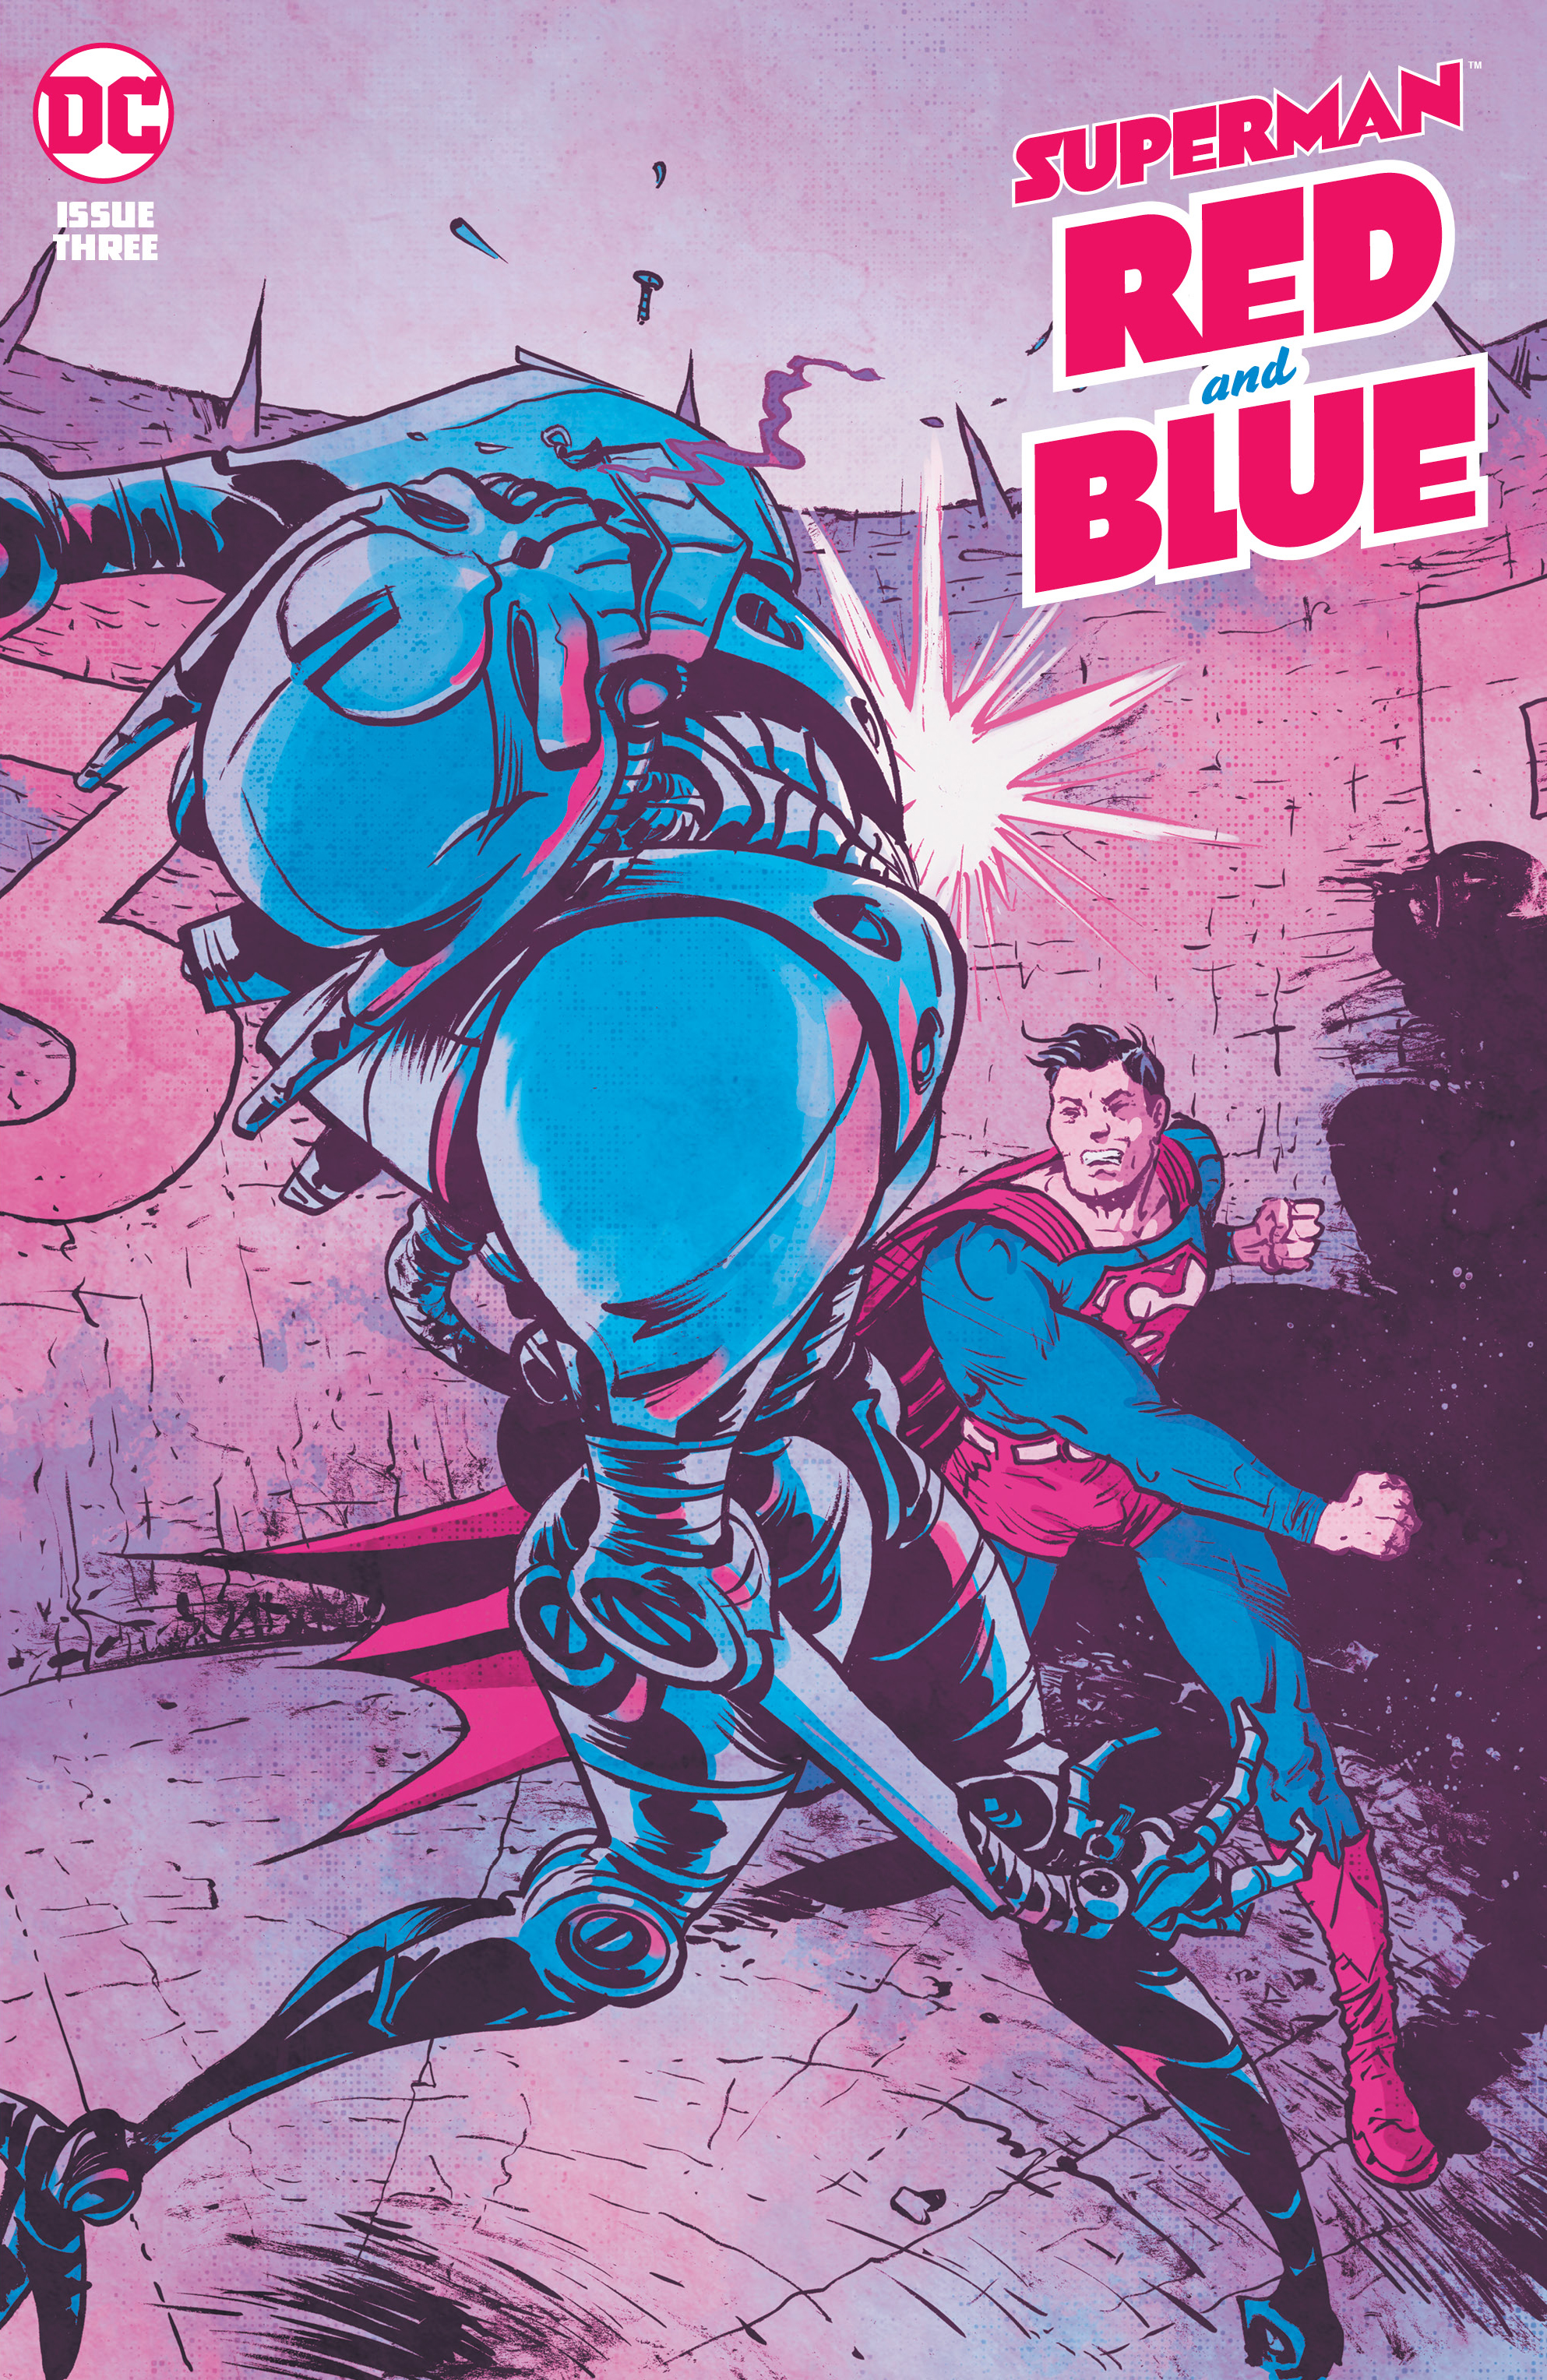 Superman Red & Blue #3 Cover A Paul Pope (Of 6)